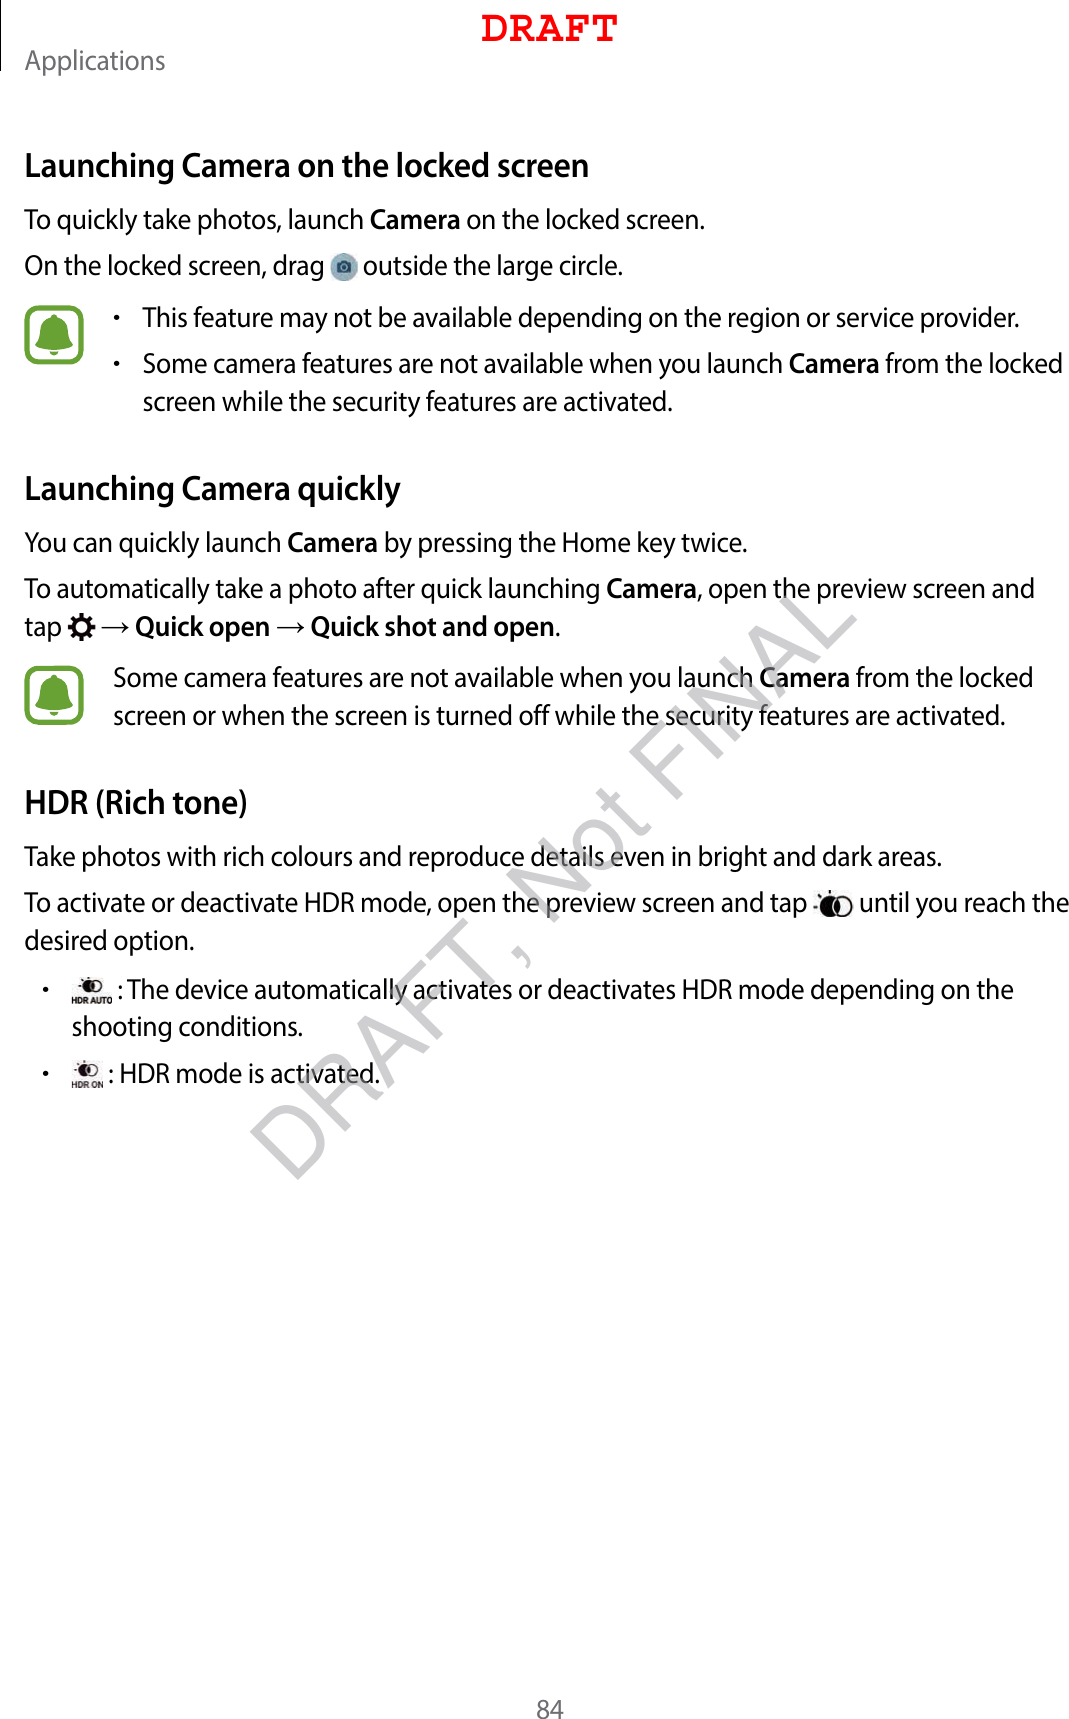 Applications84Launching Camera on the locked screenTo quickly take photos, launch Camera on the locked screen.On the locked screen, drag   outside the large circle.•This feature may not be available depending on the region or service provider.•Some camera features are not available when you launch Camera from the locked screen while the security features are activated.Launching Camera quicklyYou can quickly launch Camera by pressing the Home key twice.To automatically take a photo after quick launching Camera, open the preview screen and tap    Quick open  Quick shot and open.Some camera features are not available when you launch Camera from the locked screen or when the screen is turned off while the security features are activated.HDR (Rich tone)Take photos with rich colours and reproduce details even in bright and dark areas.To activate or deactivate HDR mode, open the preview screen and tap   until you reach the desired option.• : The device automatically activates or deactivates HDR mode depending on the shooting conditions.• : HDR mode is activated.DRAFTDRAFT, Not FINAL